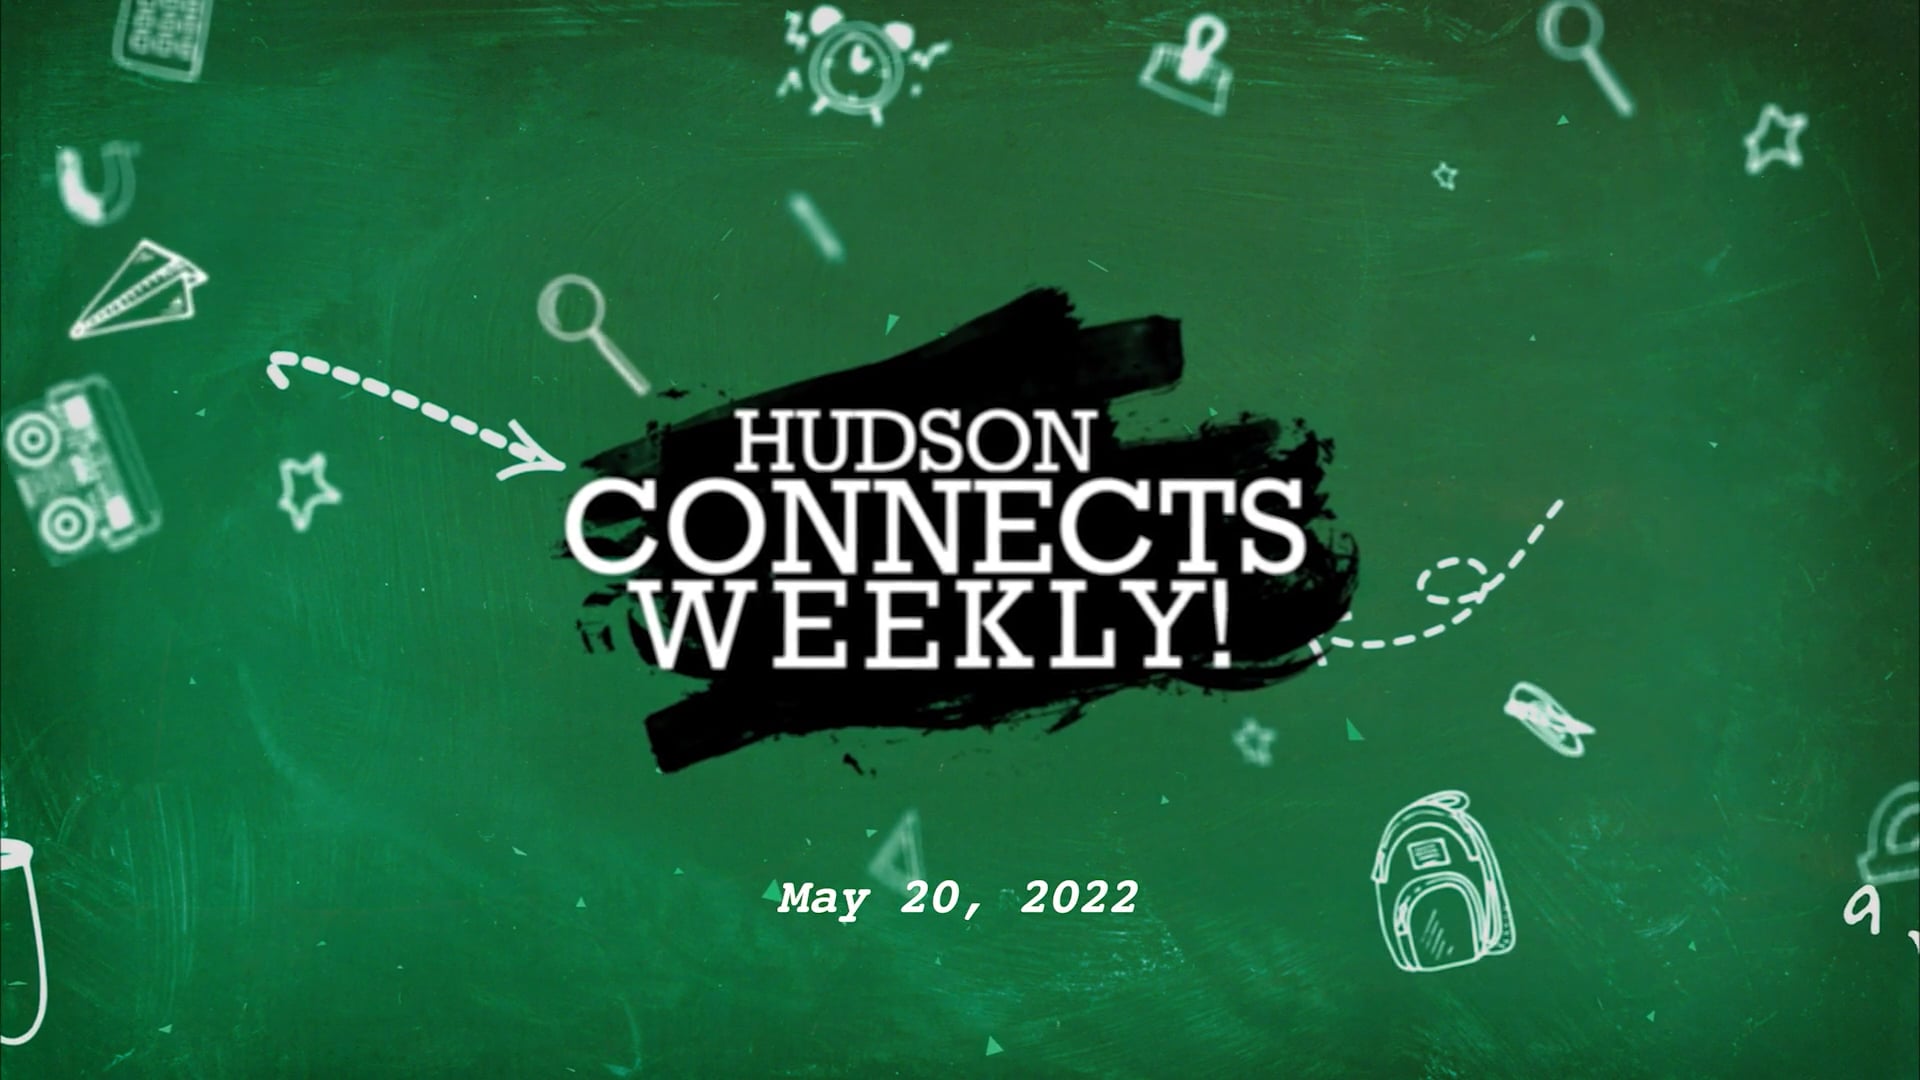 Hudosn Connects Weekly - May 20, 2022